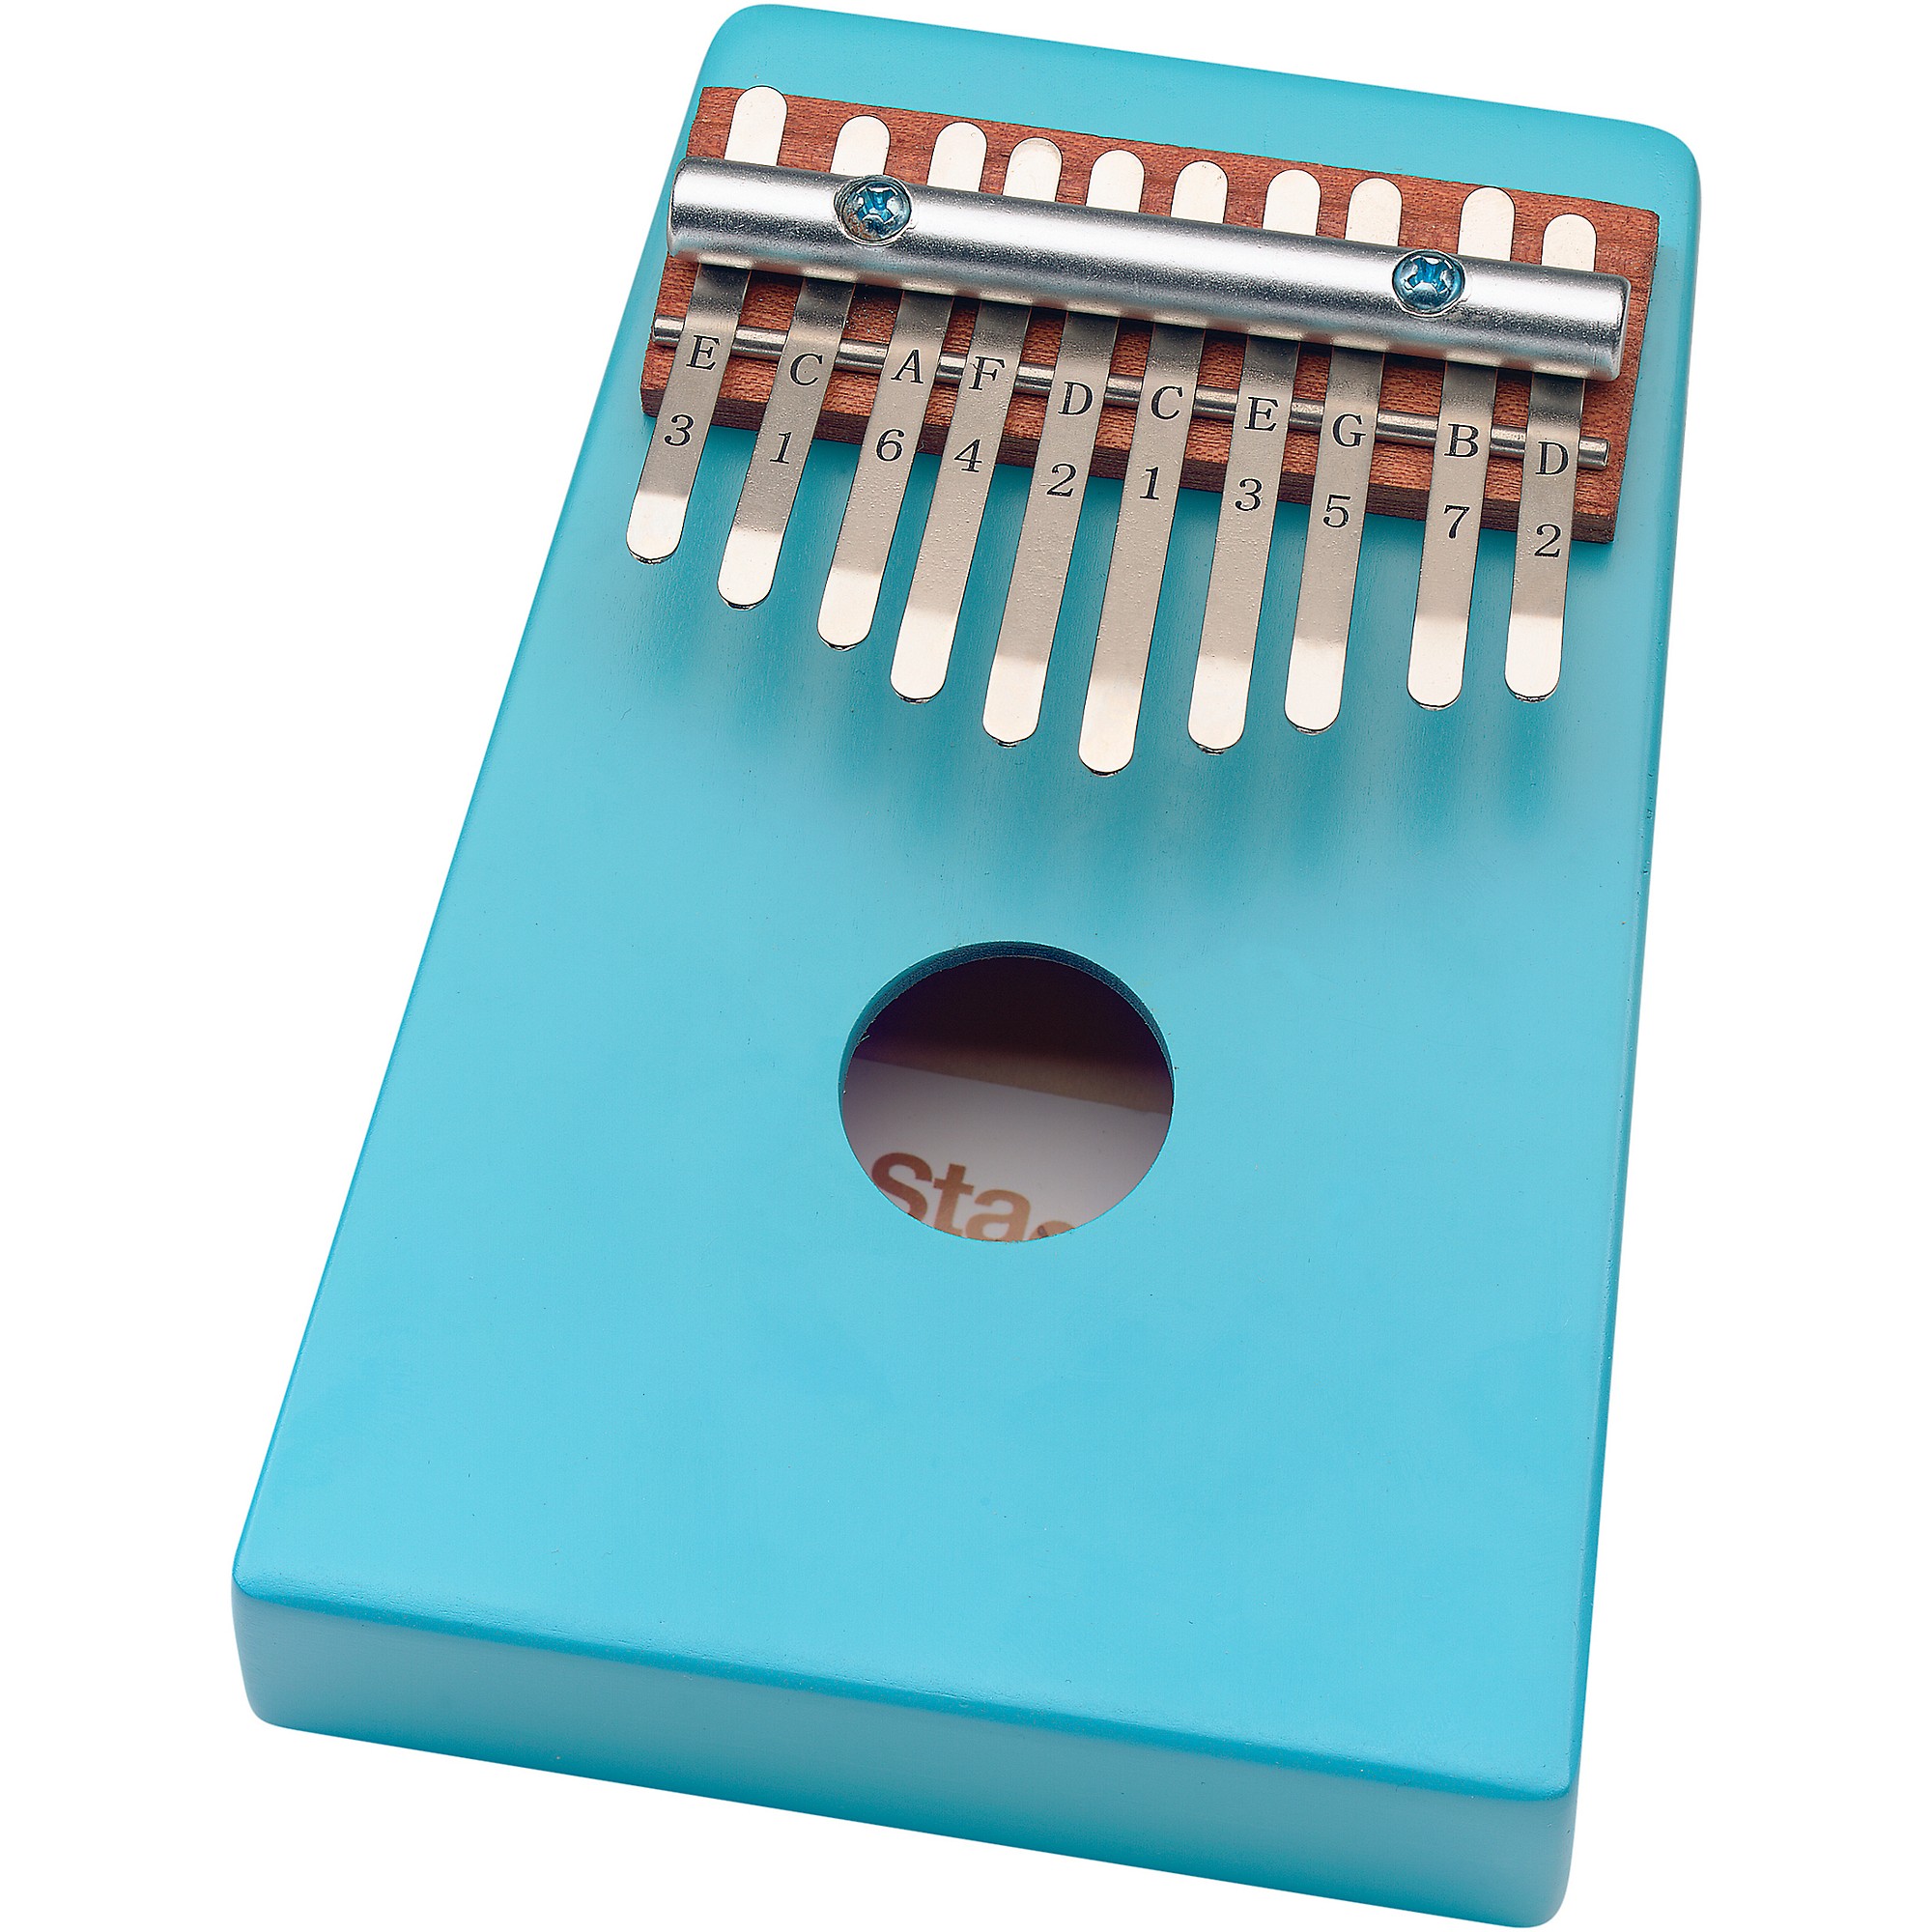 renere orientering lunge Stagg 10-Key Kid's Kalimba with Note Names Printed on Keys | Guitar Center